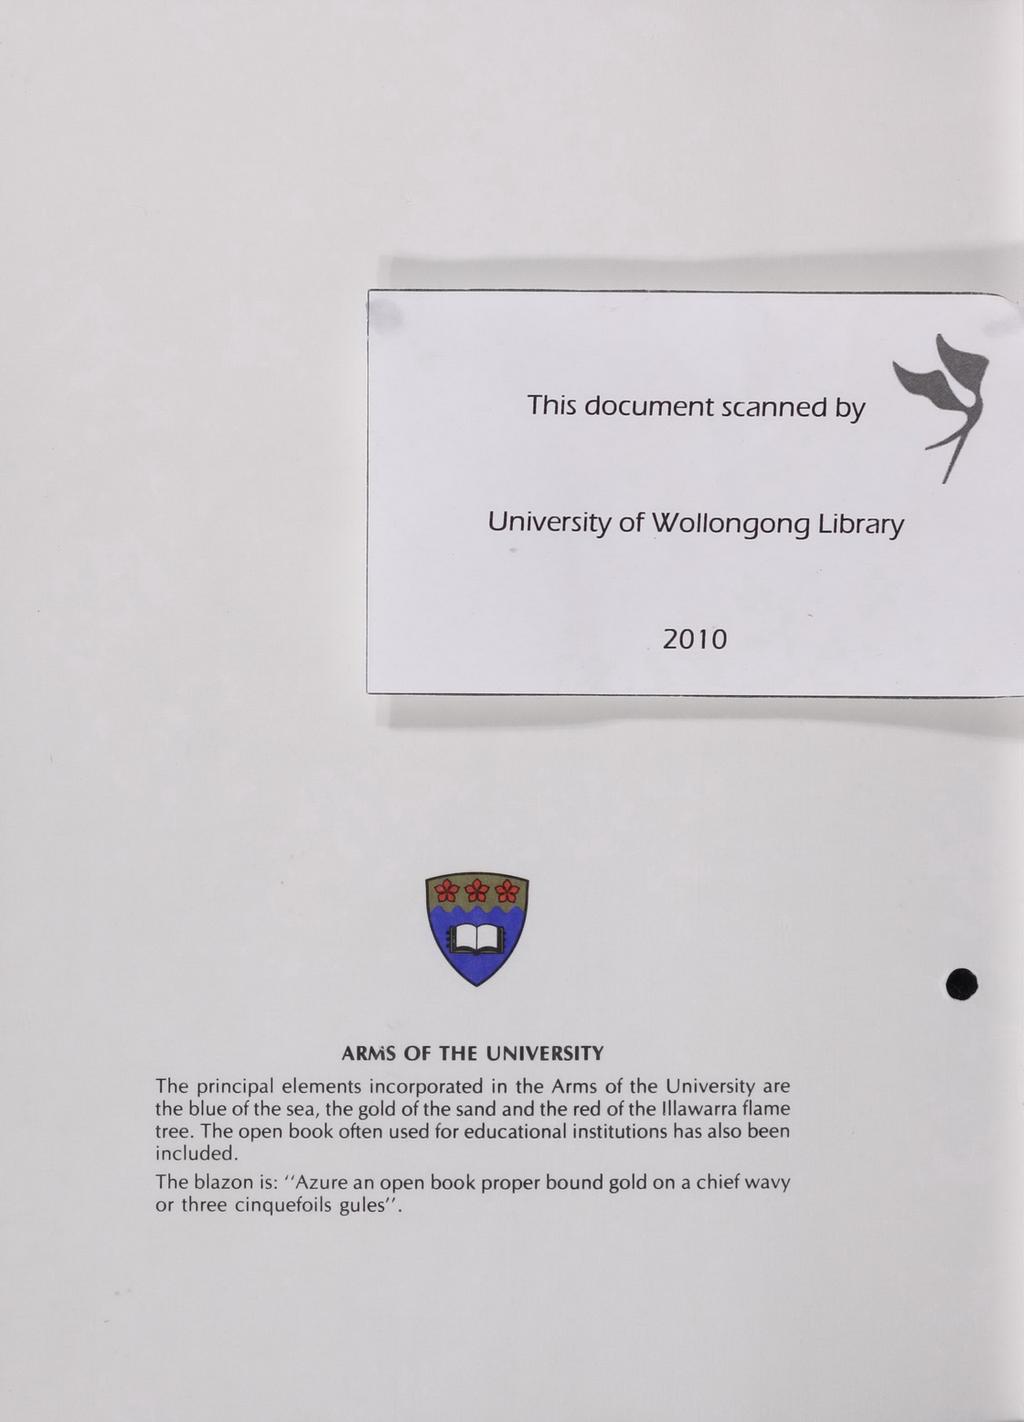 I This document scanned by University of WOllongong Library 2010 ARMS OF THE UNIVERSITY The principal elements incorporated in the Arms of the University are the blue of the sea, the gold of the sand